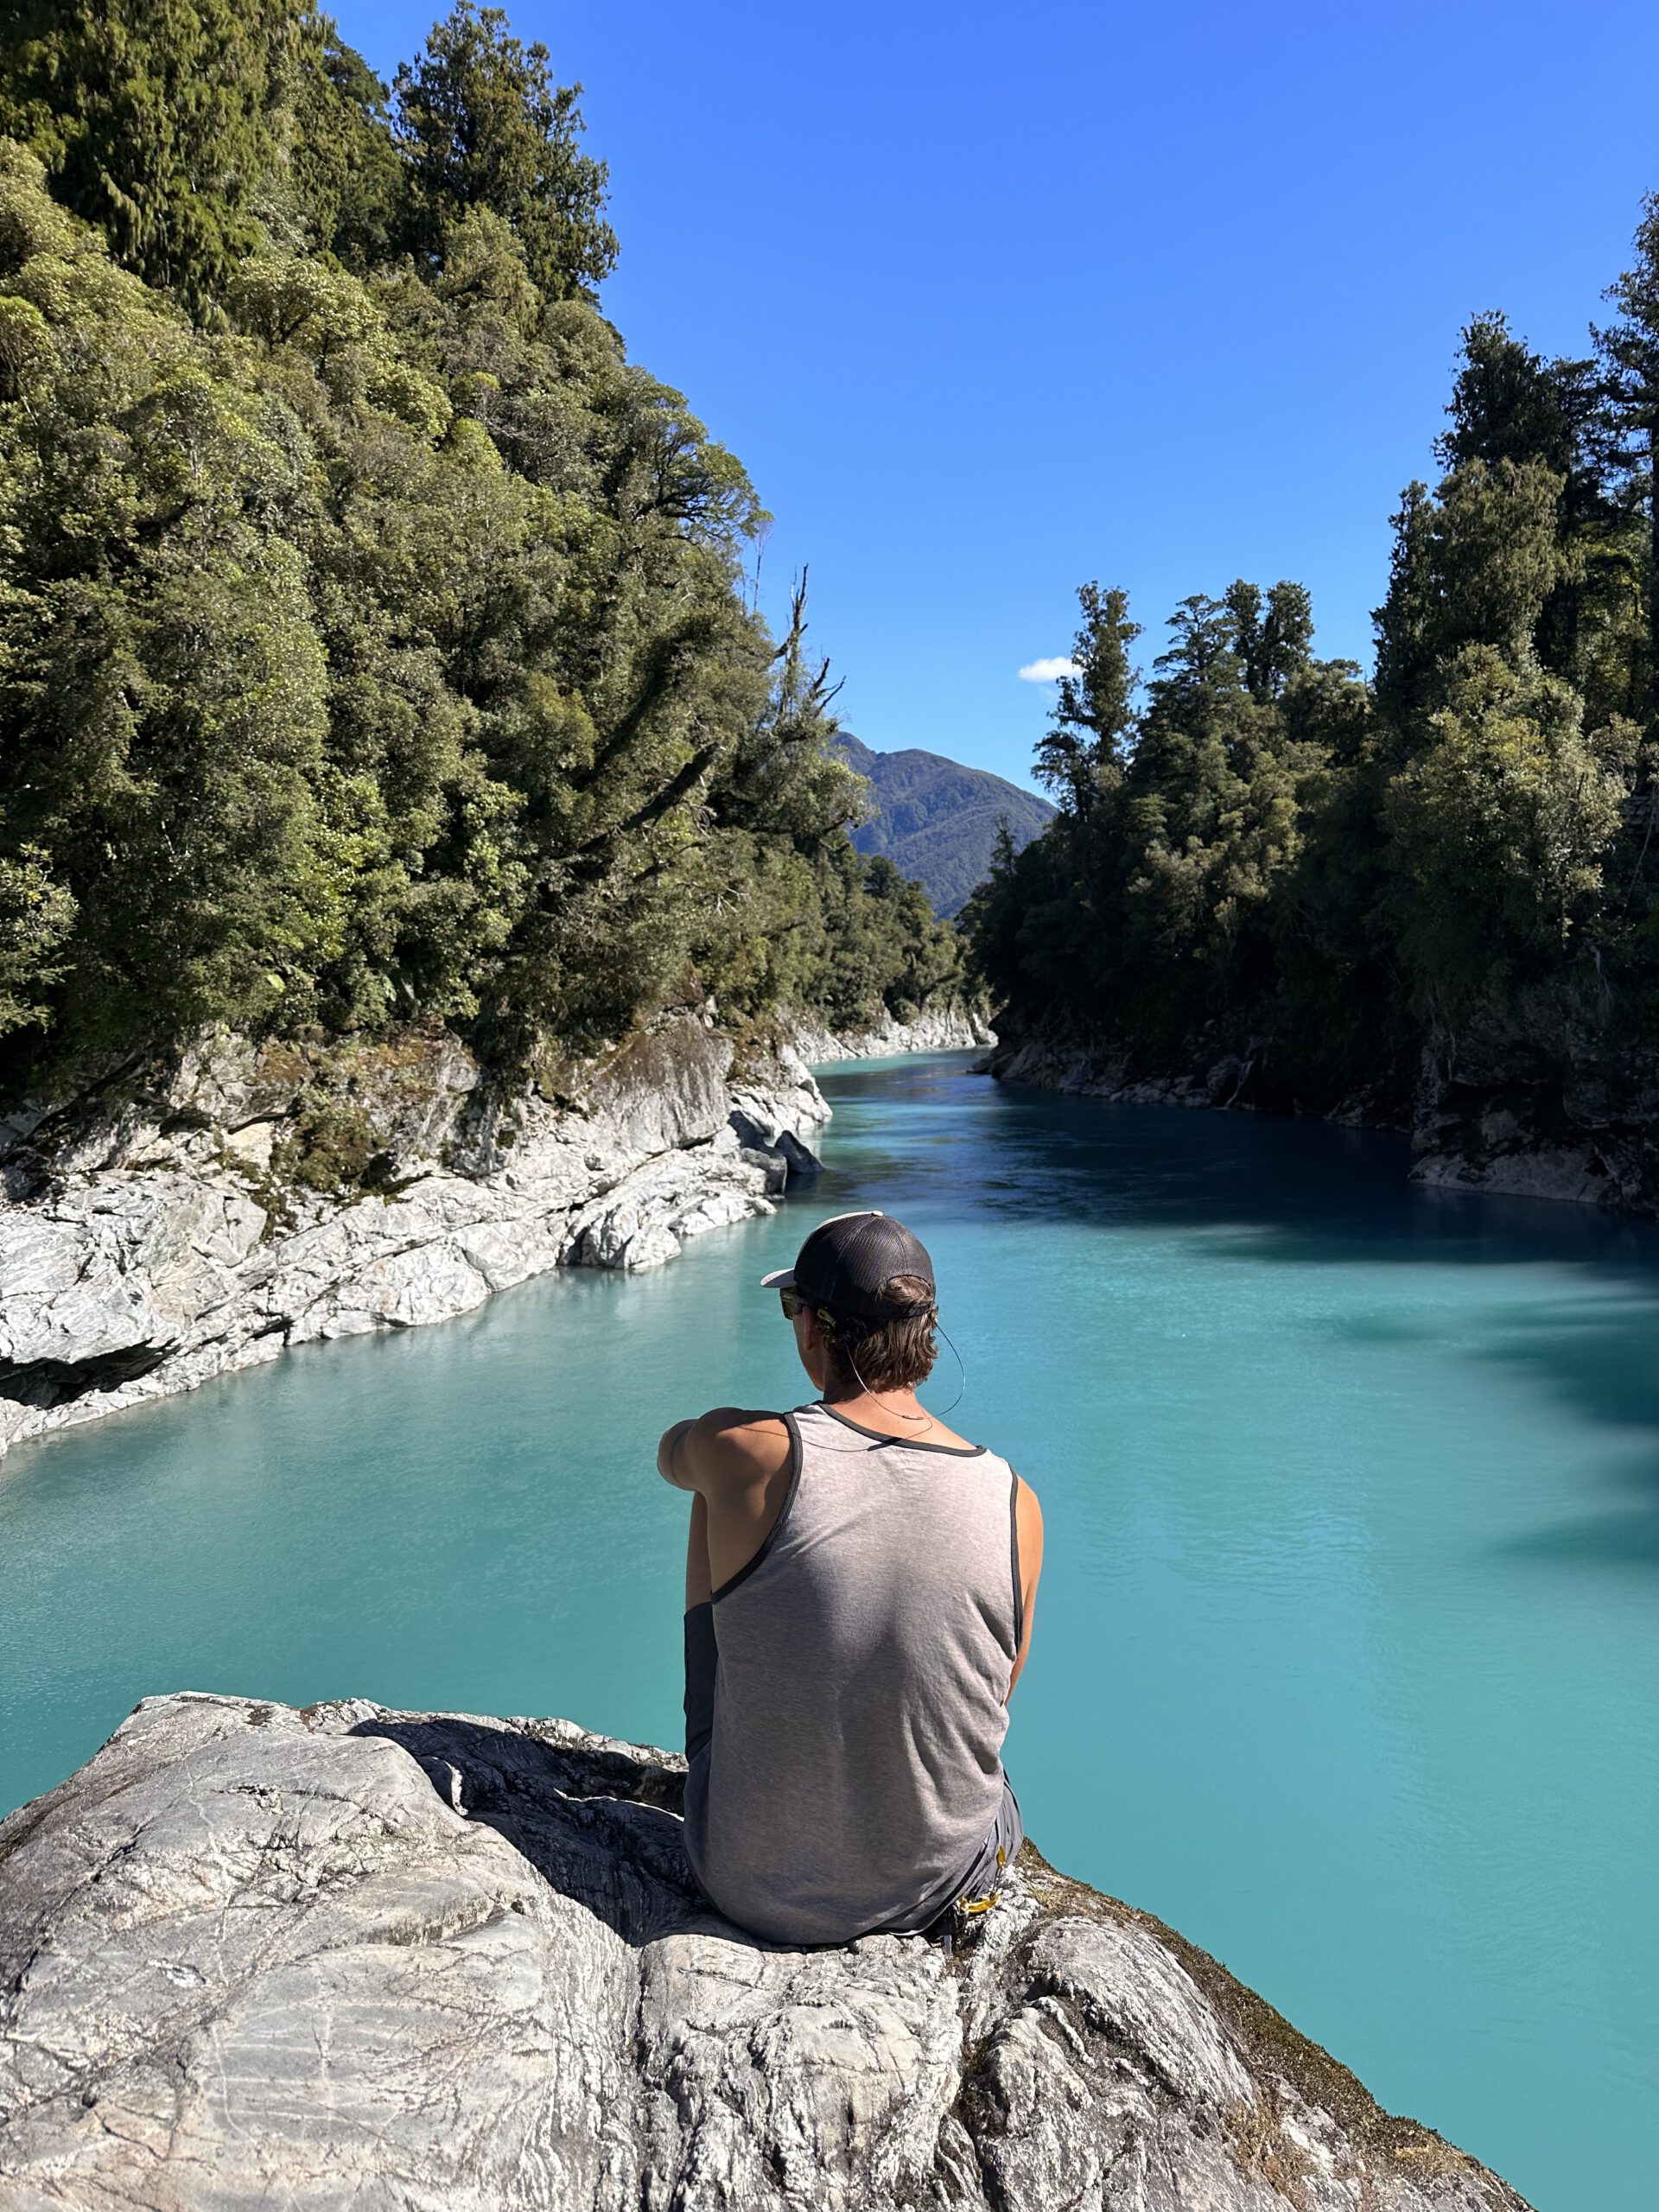 Sitting on a rock at Hokitika Gorge on the South Island of New Zealand